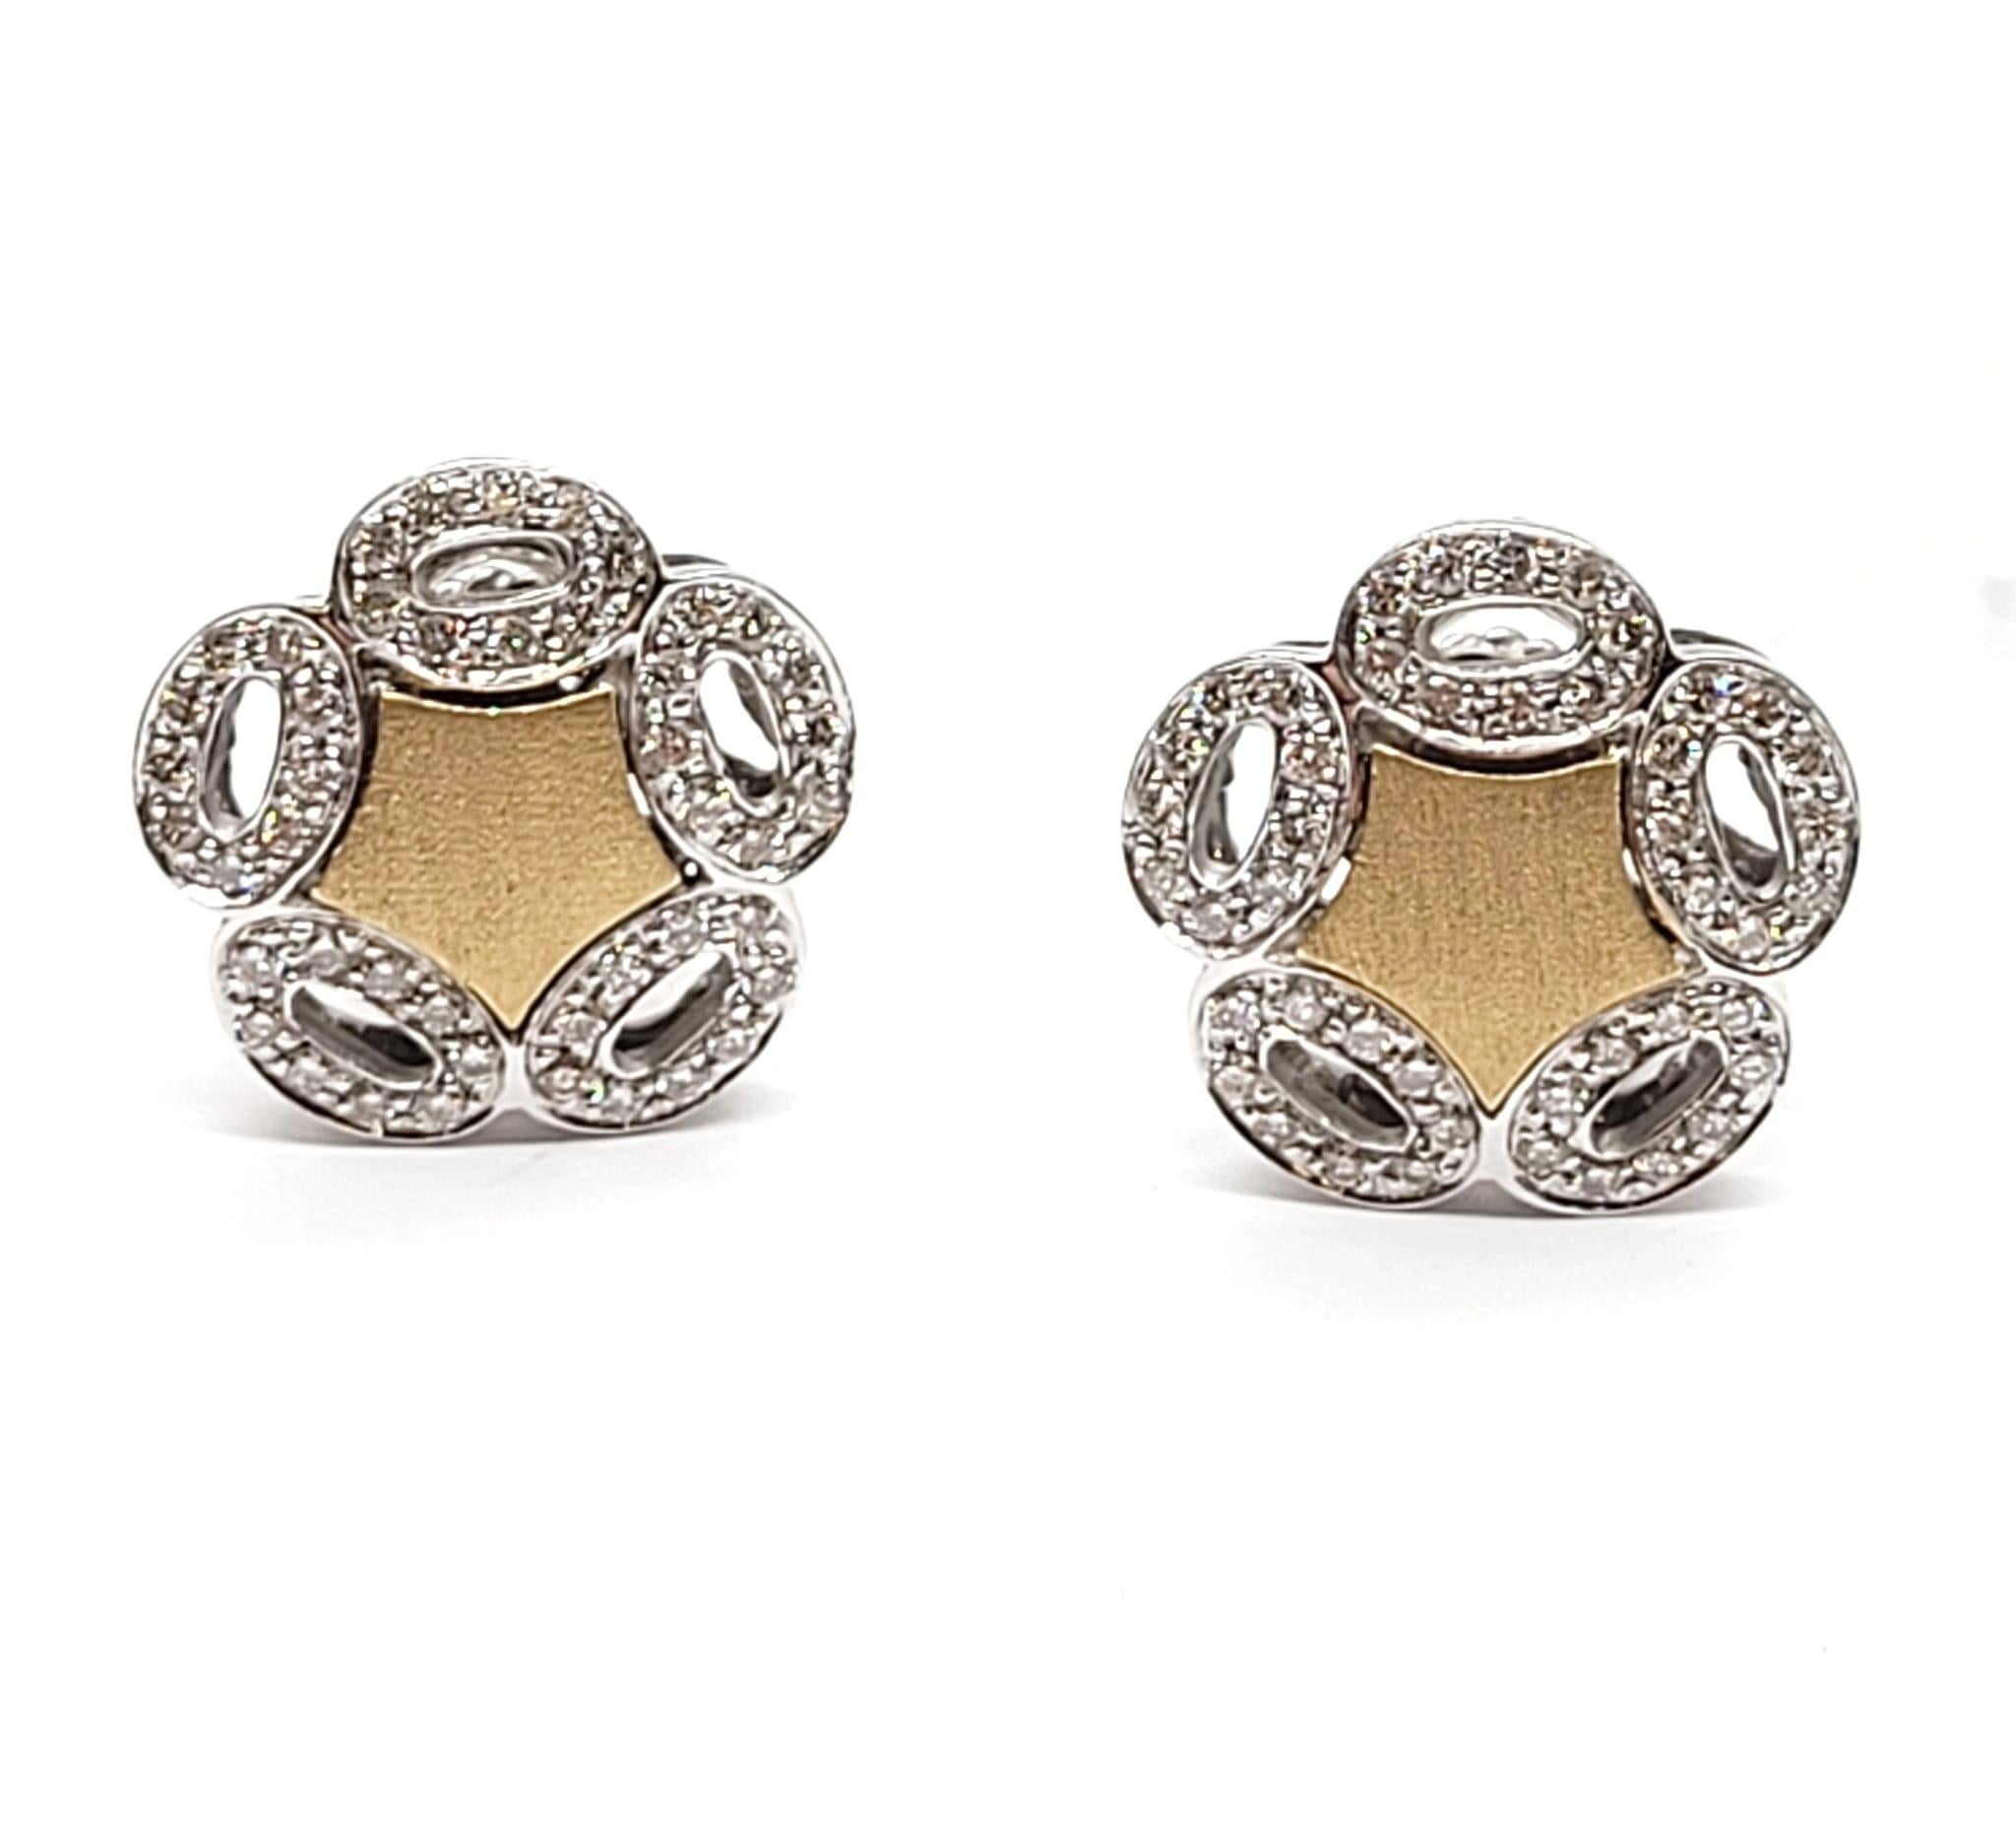 Andreoli Diamond 18 Karat Two-Tone Gold Earrings

These earrings feature:
- 0.83 Carat Diamond
- 18K Two-Tone Gold
- Made In Italy